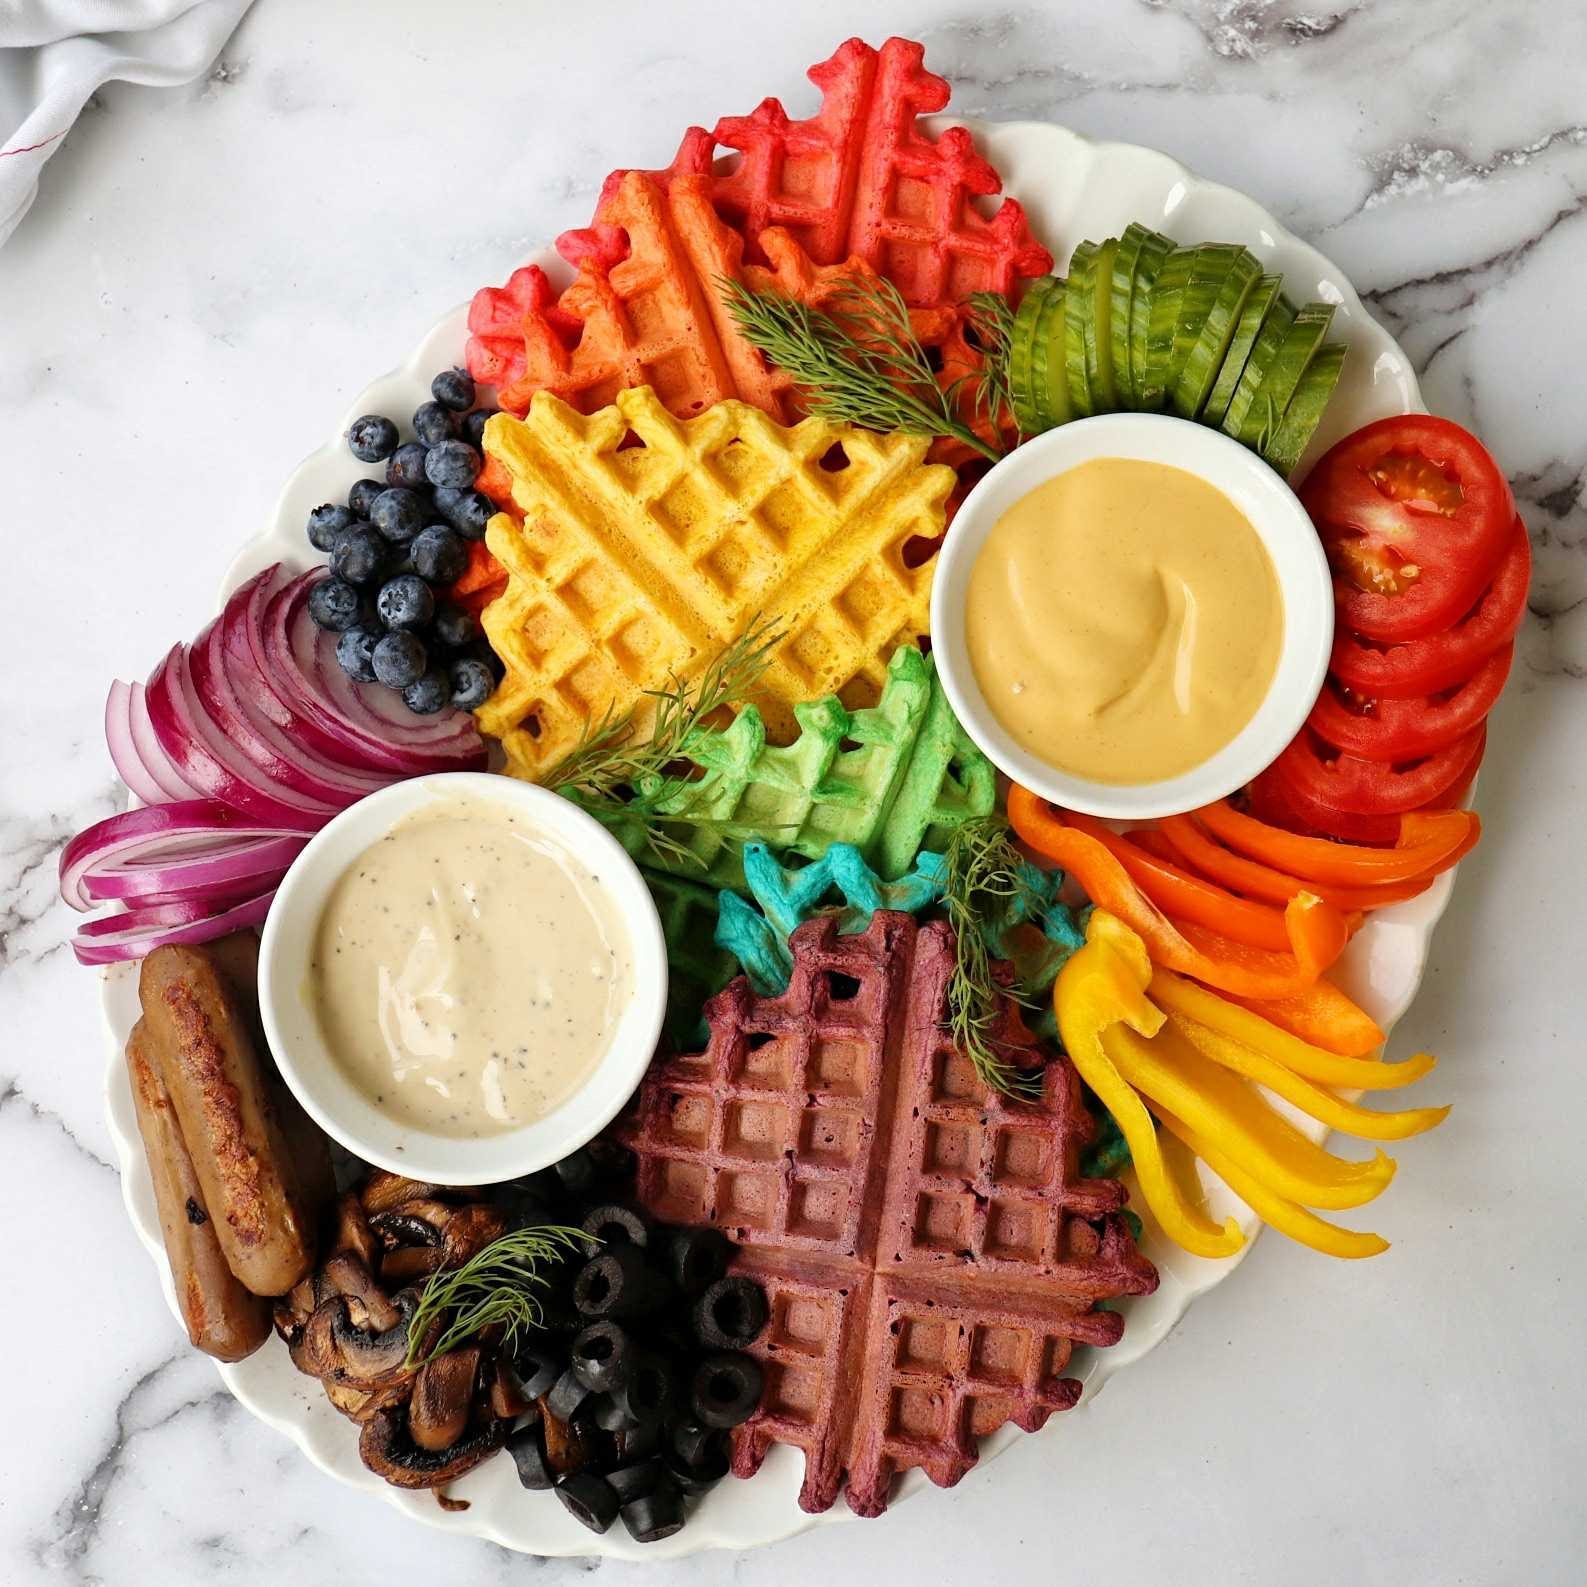 NONA's waffle board resembles a rainbow of food: red, yellow, green, blue, and purple waffles are surrounded by blueberries, vegan sausages, cucumbers, bell peppers, and blueberries. Warmed NONA sauces are nestled next to the waffles in white ramekins.